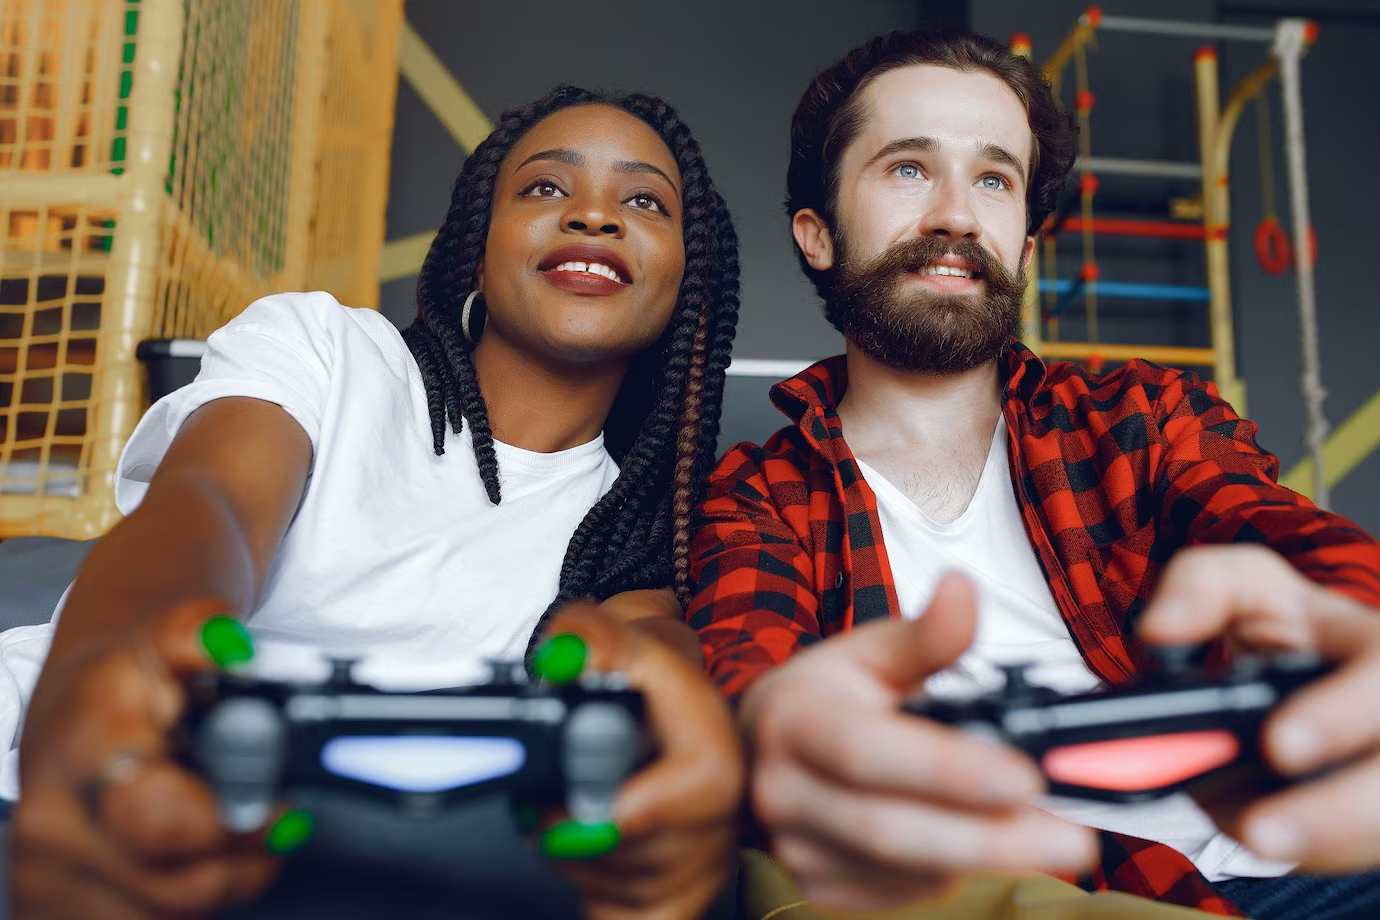 The Best Local Multiplayer Party Games to Play With Friends